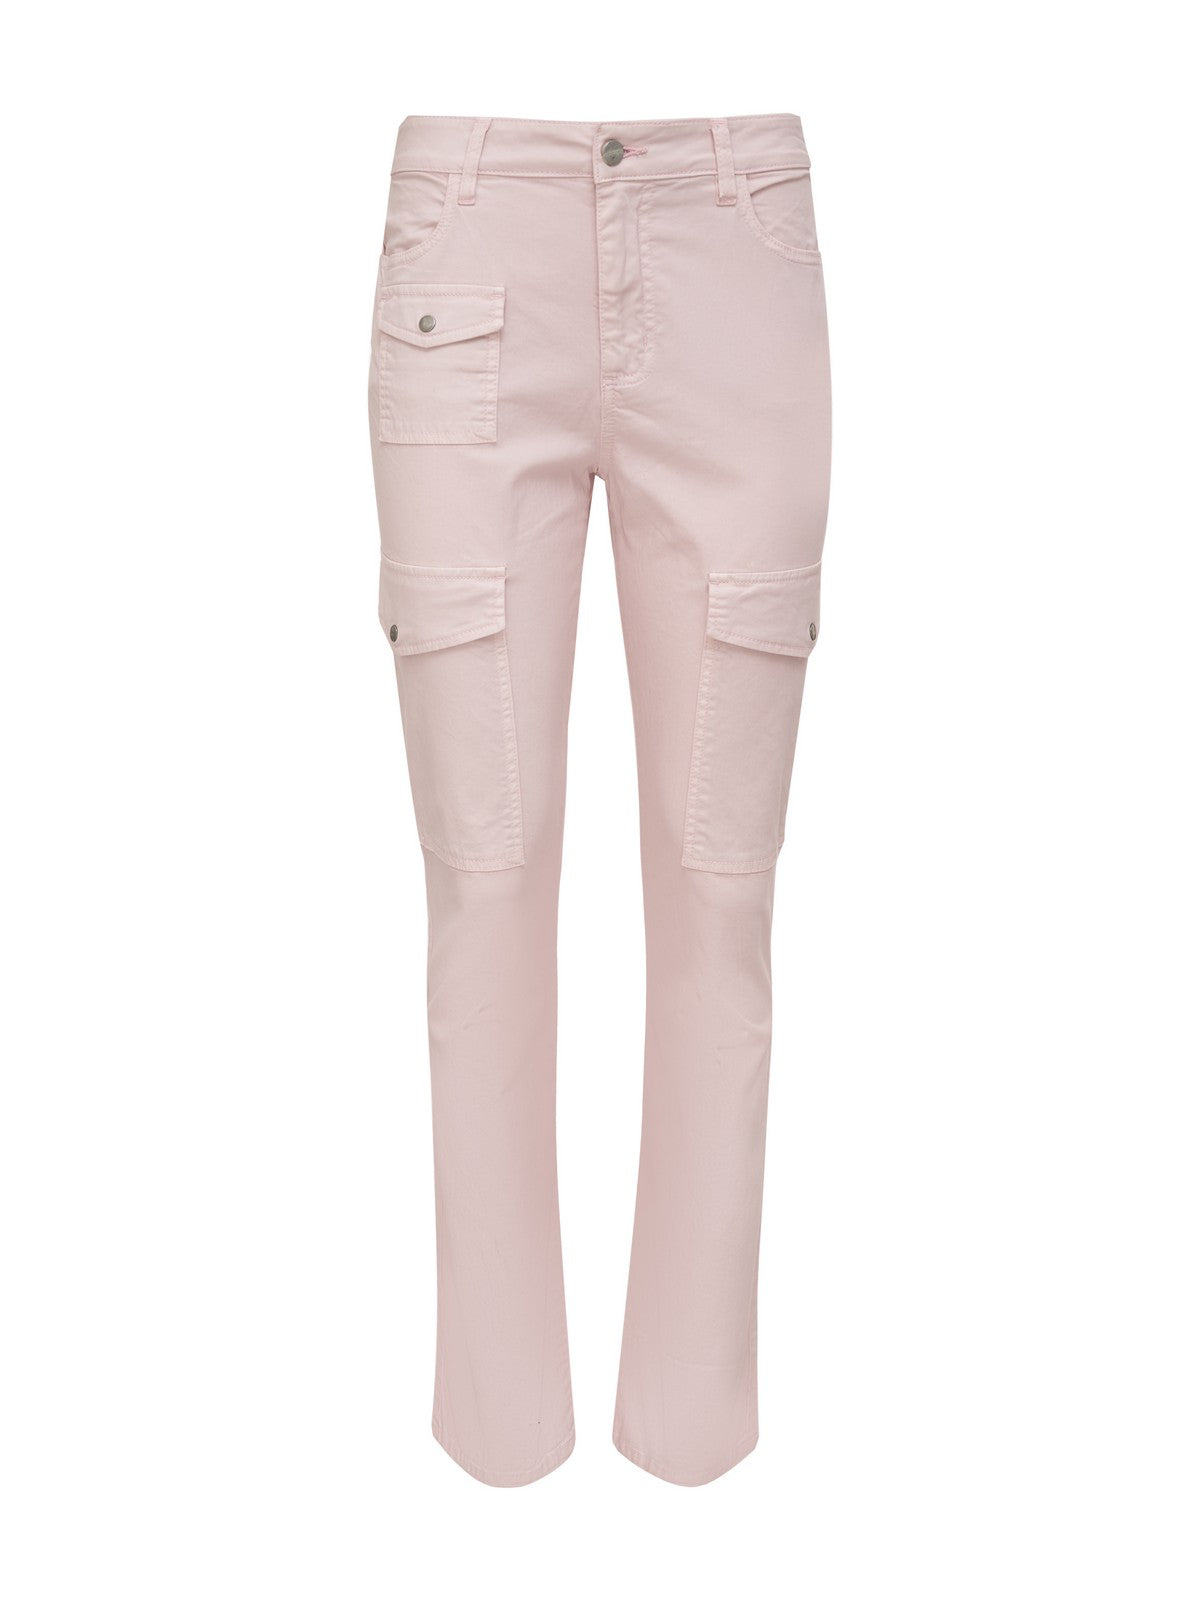 Poppy Cargo Semi High Rise Pant Washed Pink No.3